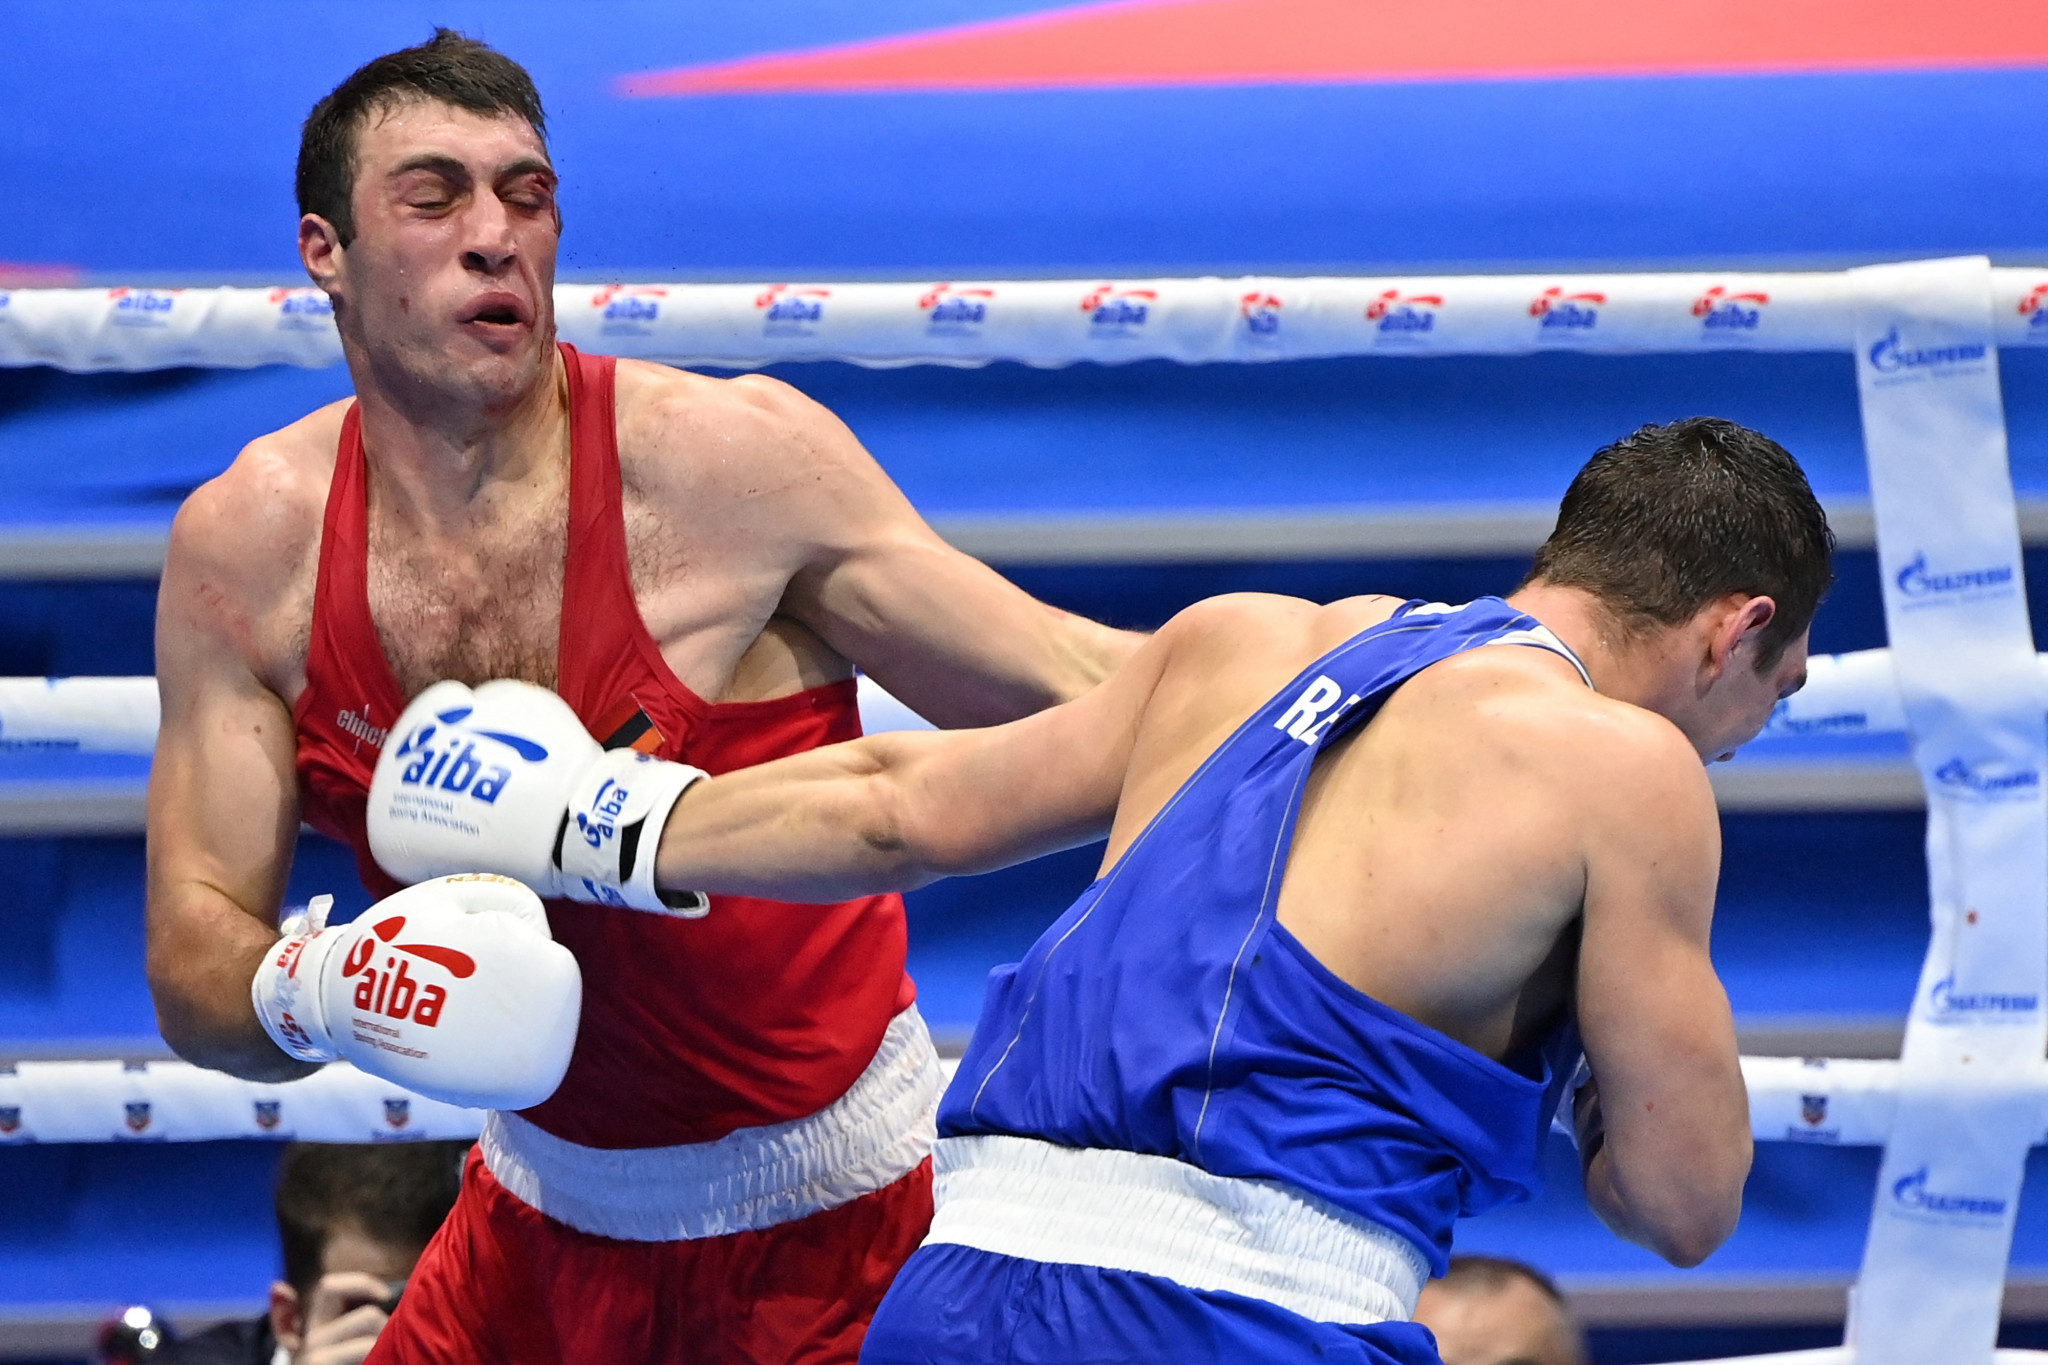 Davit Chaloyan of Armenia was able to fight when the referee stopped the bout after giving him two standing eight-counts against Ayoub Ghadfa Drissi El Aissaoui of Spain ©Getty Images